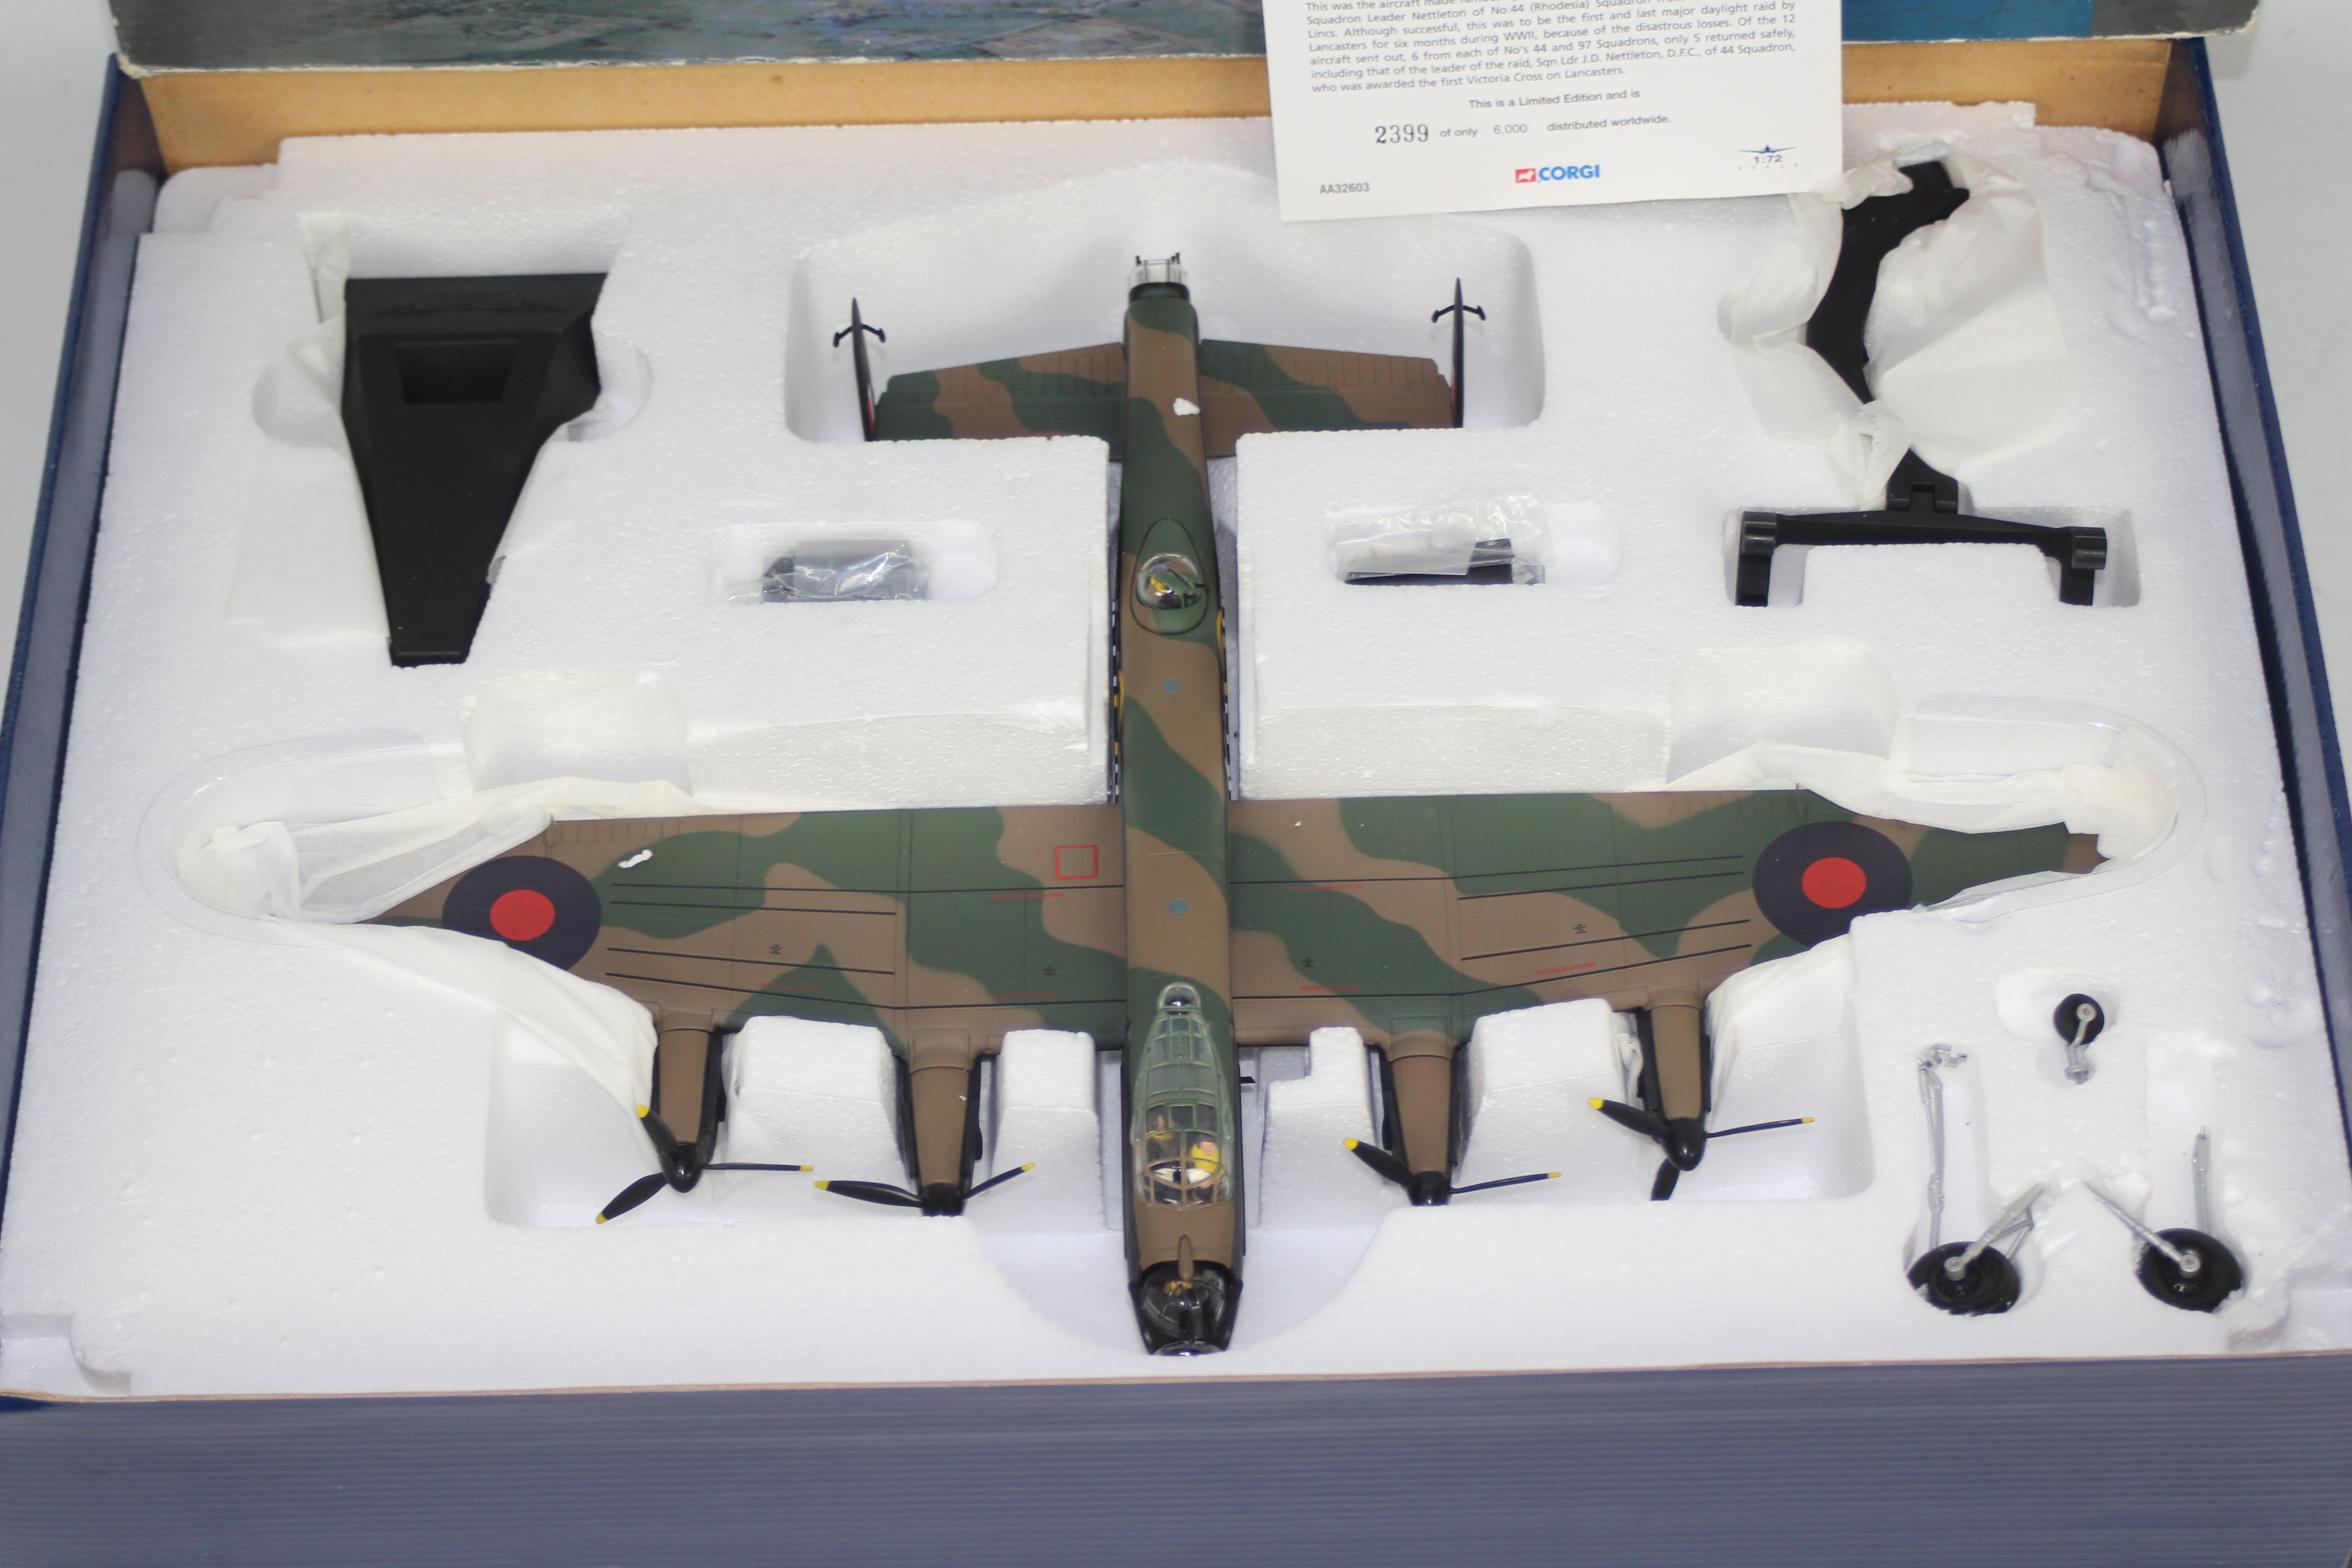 Corgi Aviation Archive - A boxed limited edition 1:72 scale AA32603 AVRO Lancaster R5508/KM-8 No. - Image 2 of 4